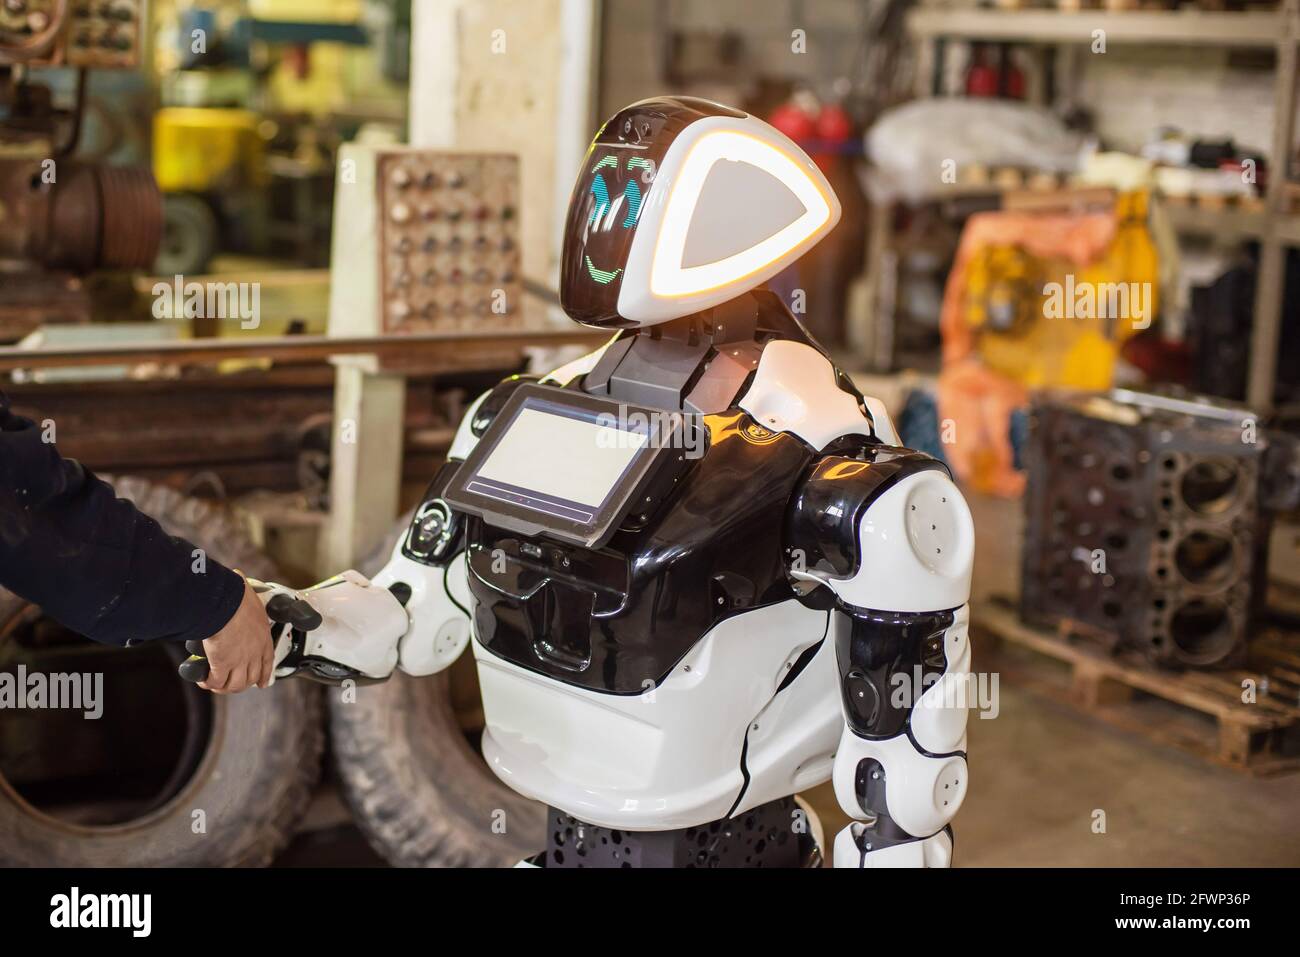 Humanoid robot on wheels with a monitor on his chest, shaking hands with a man. The old cluttered garage. Stock Photo